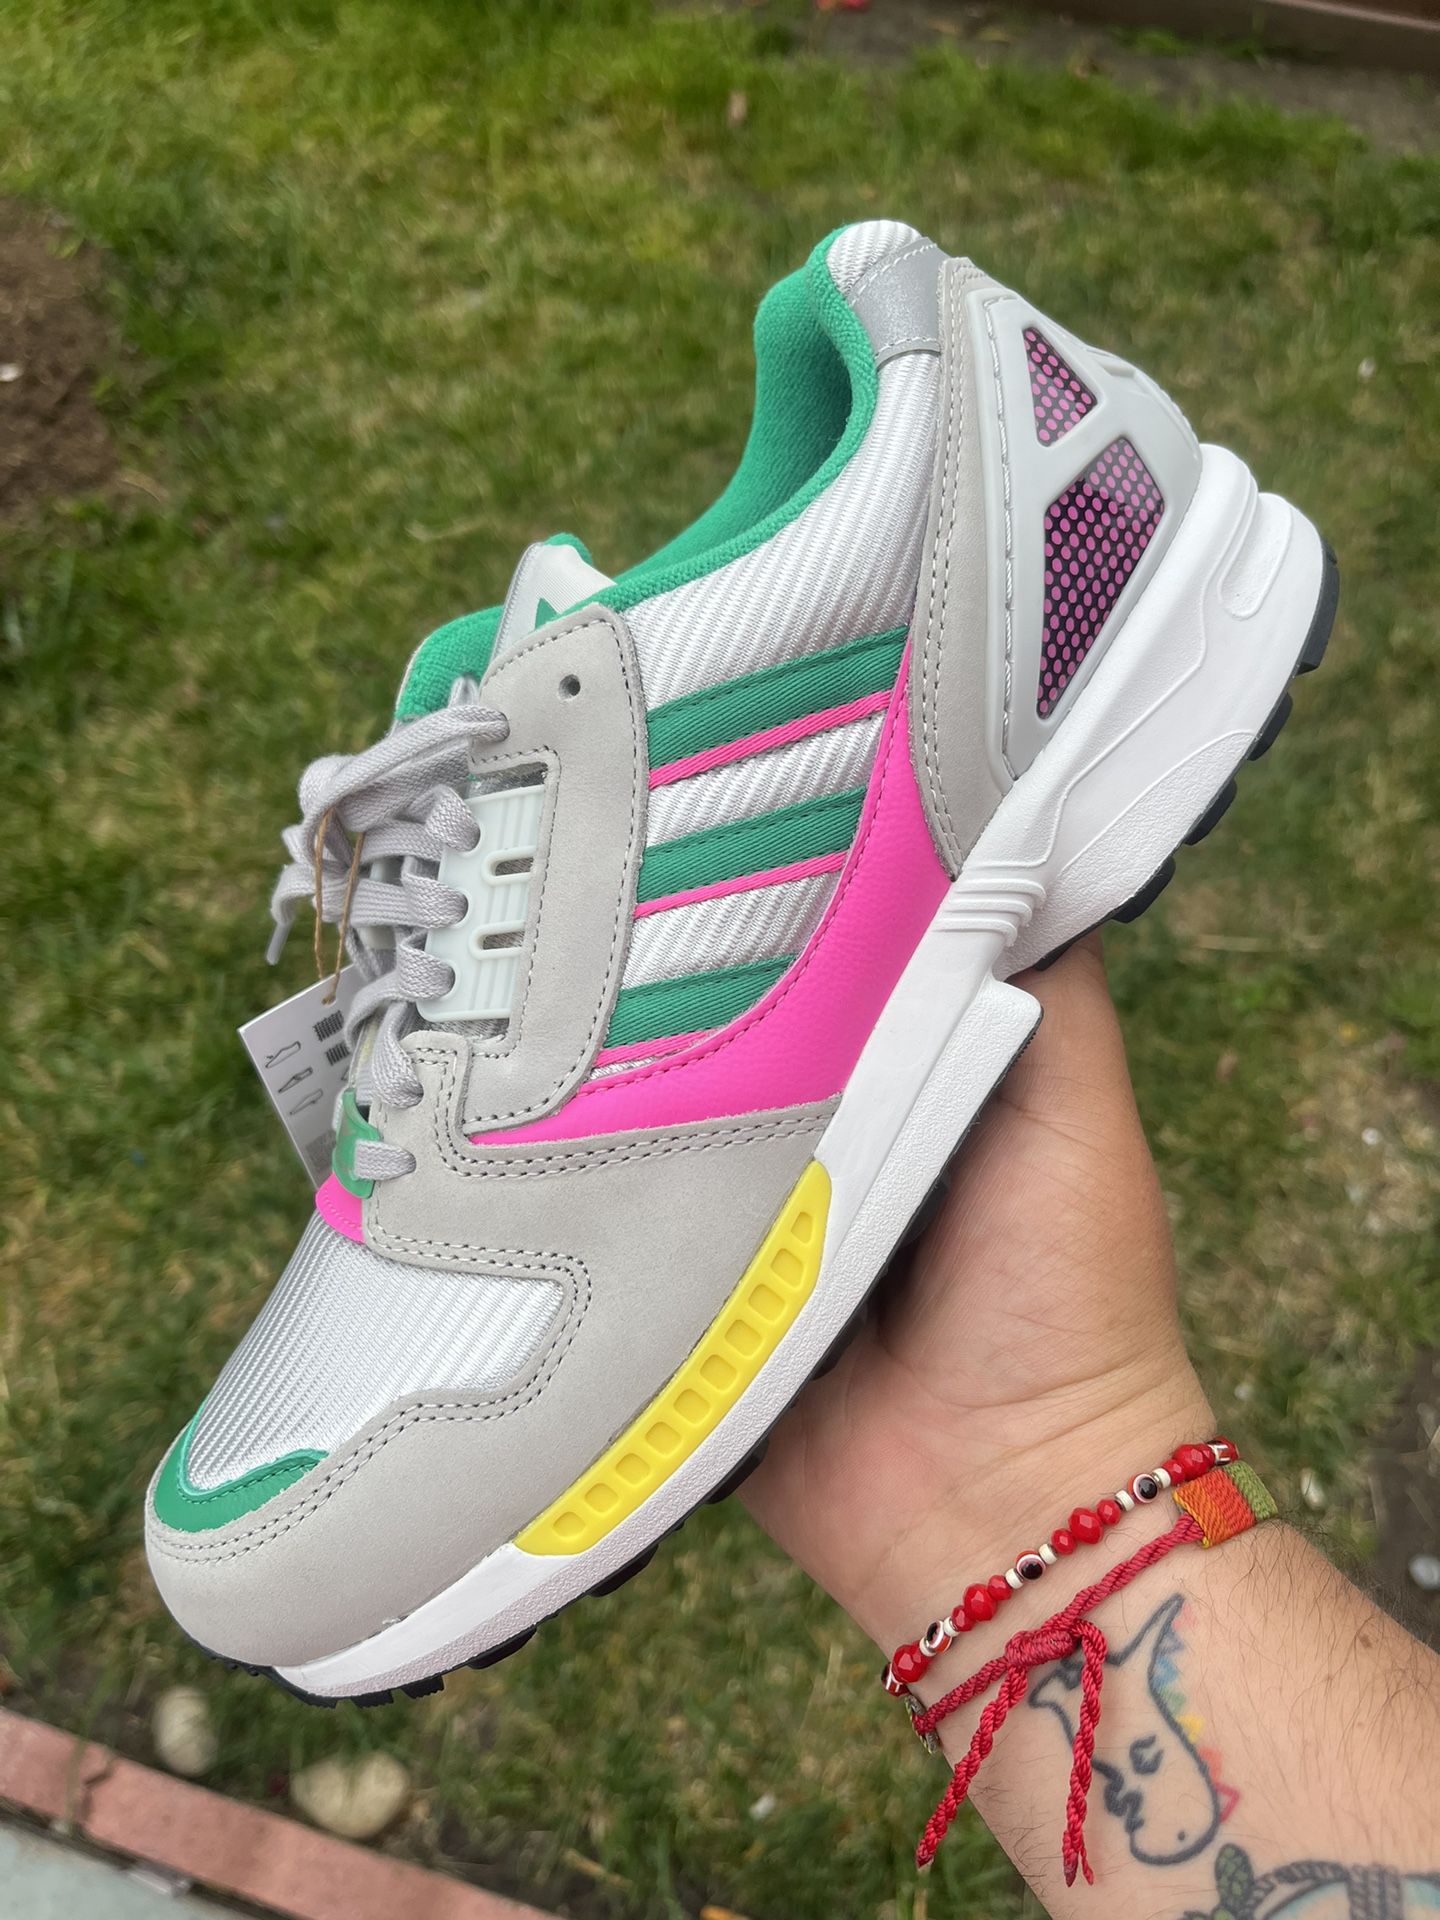 Adidas 8000 Sale in CA OfferUp